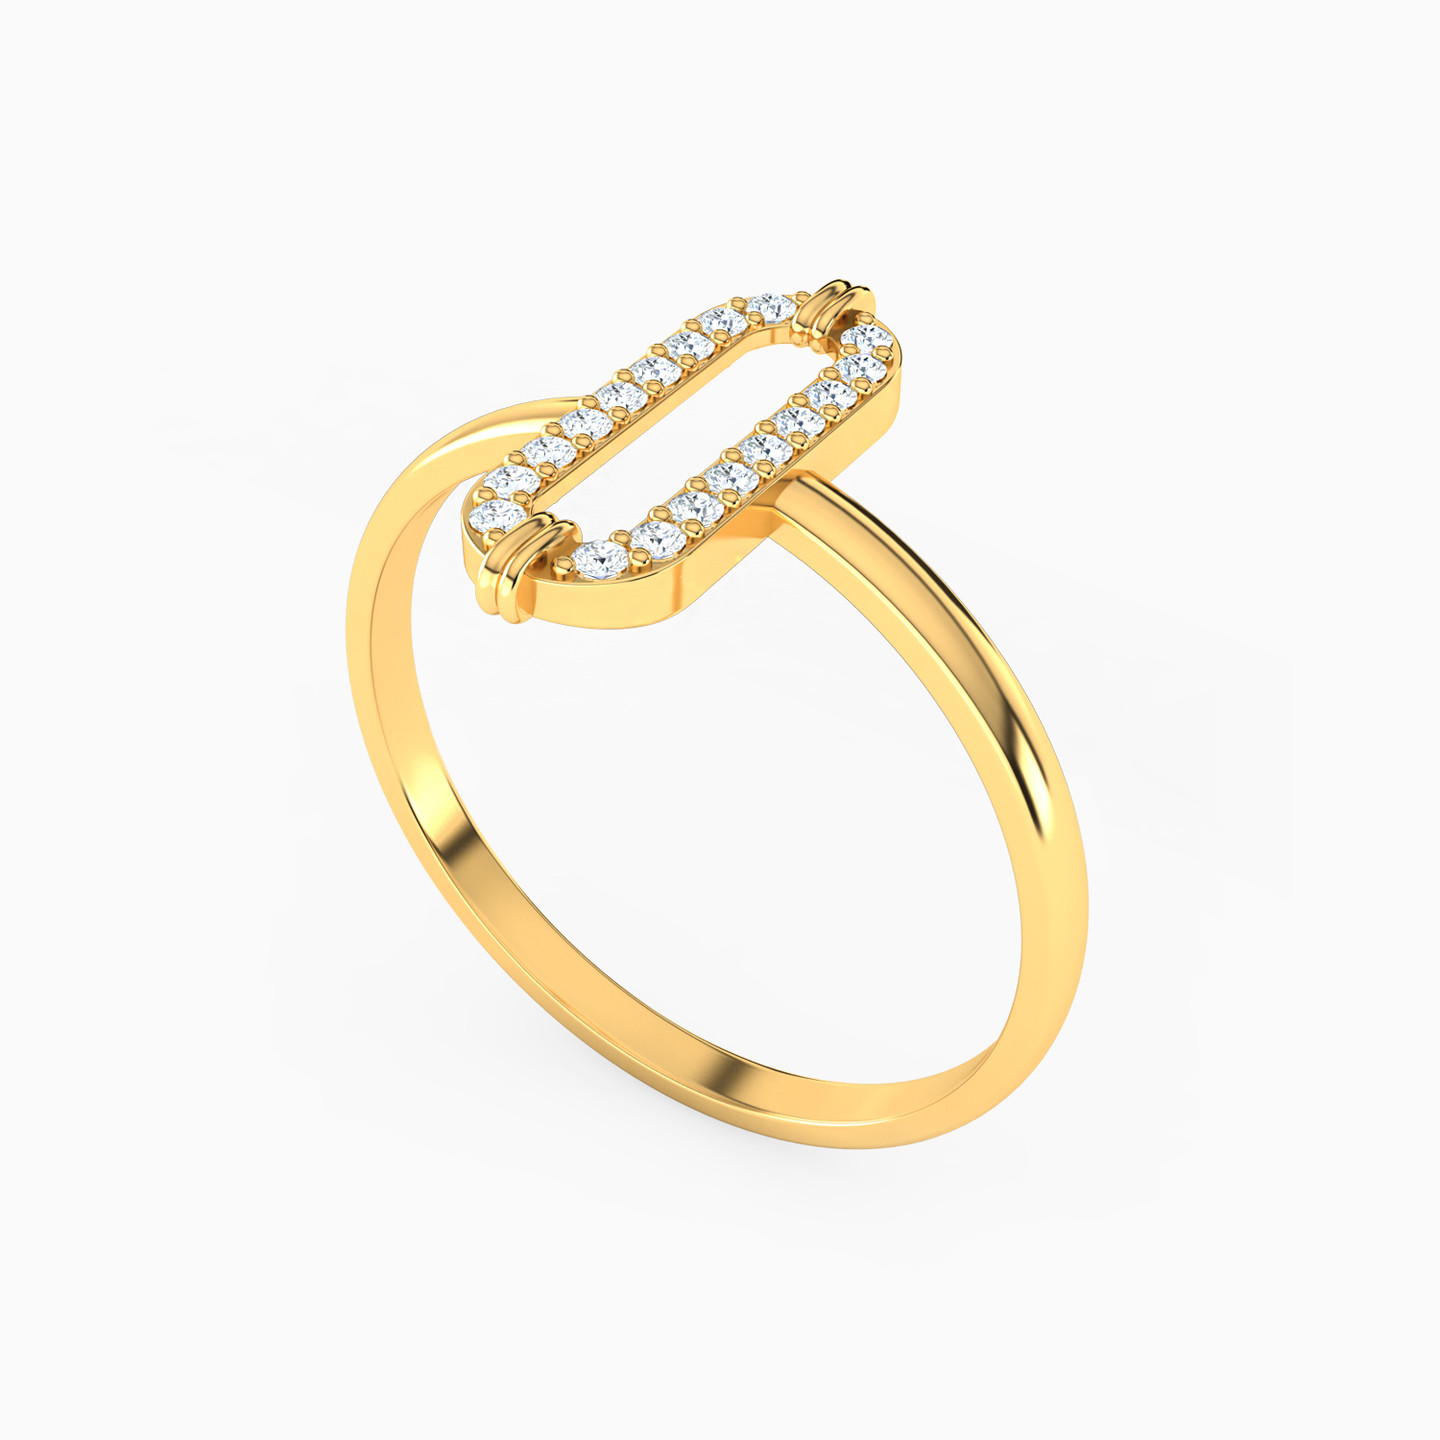 Oval Shaped Cubic Zirconia Statement Ring in 18K Gold - 2